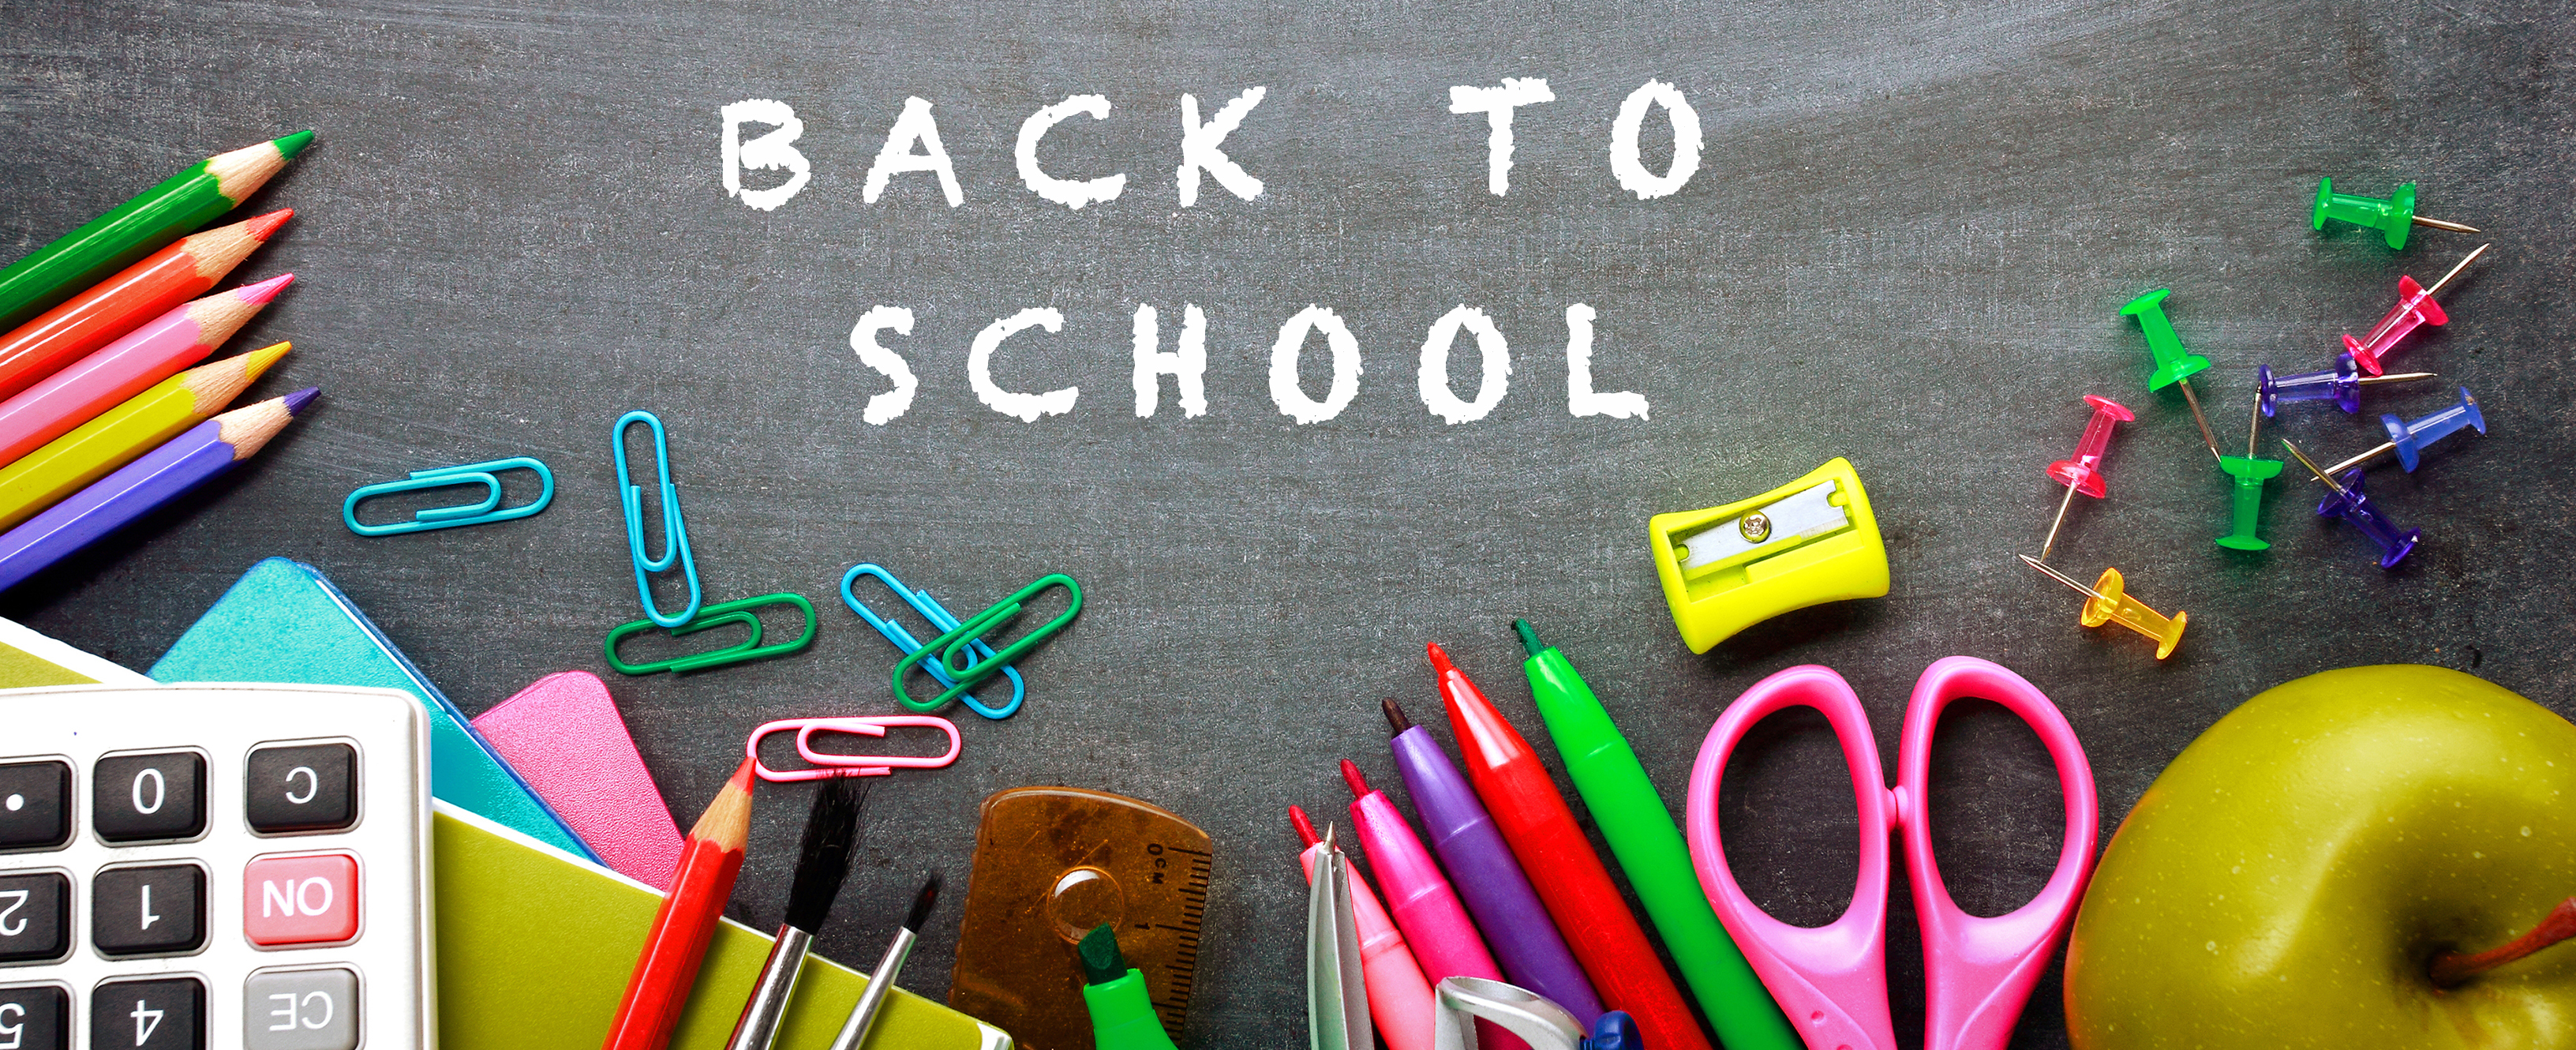 Awesome Back To School Education Wallpaper HD Wallpaper